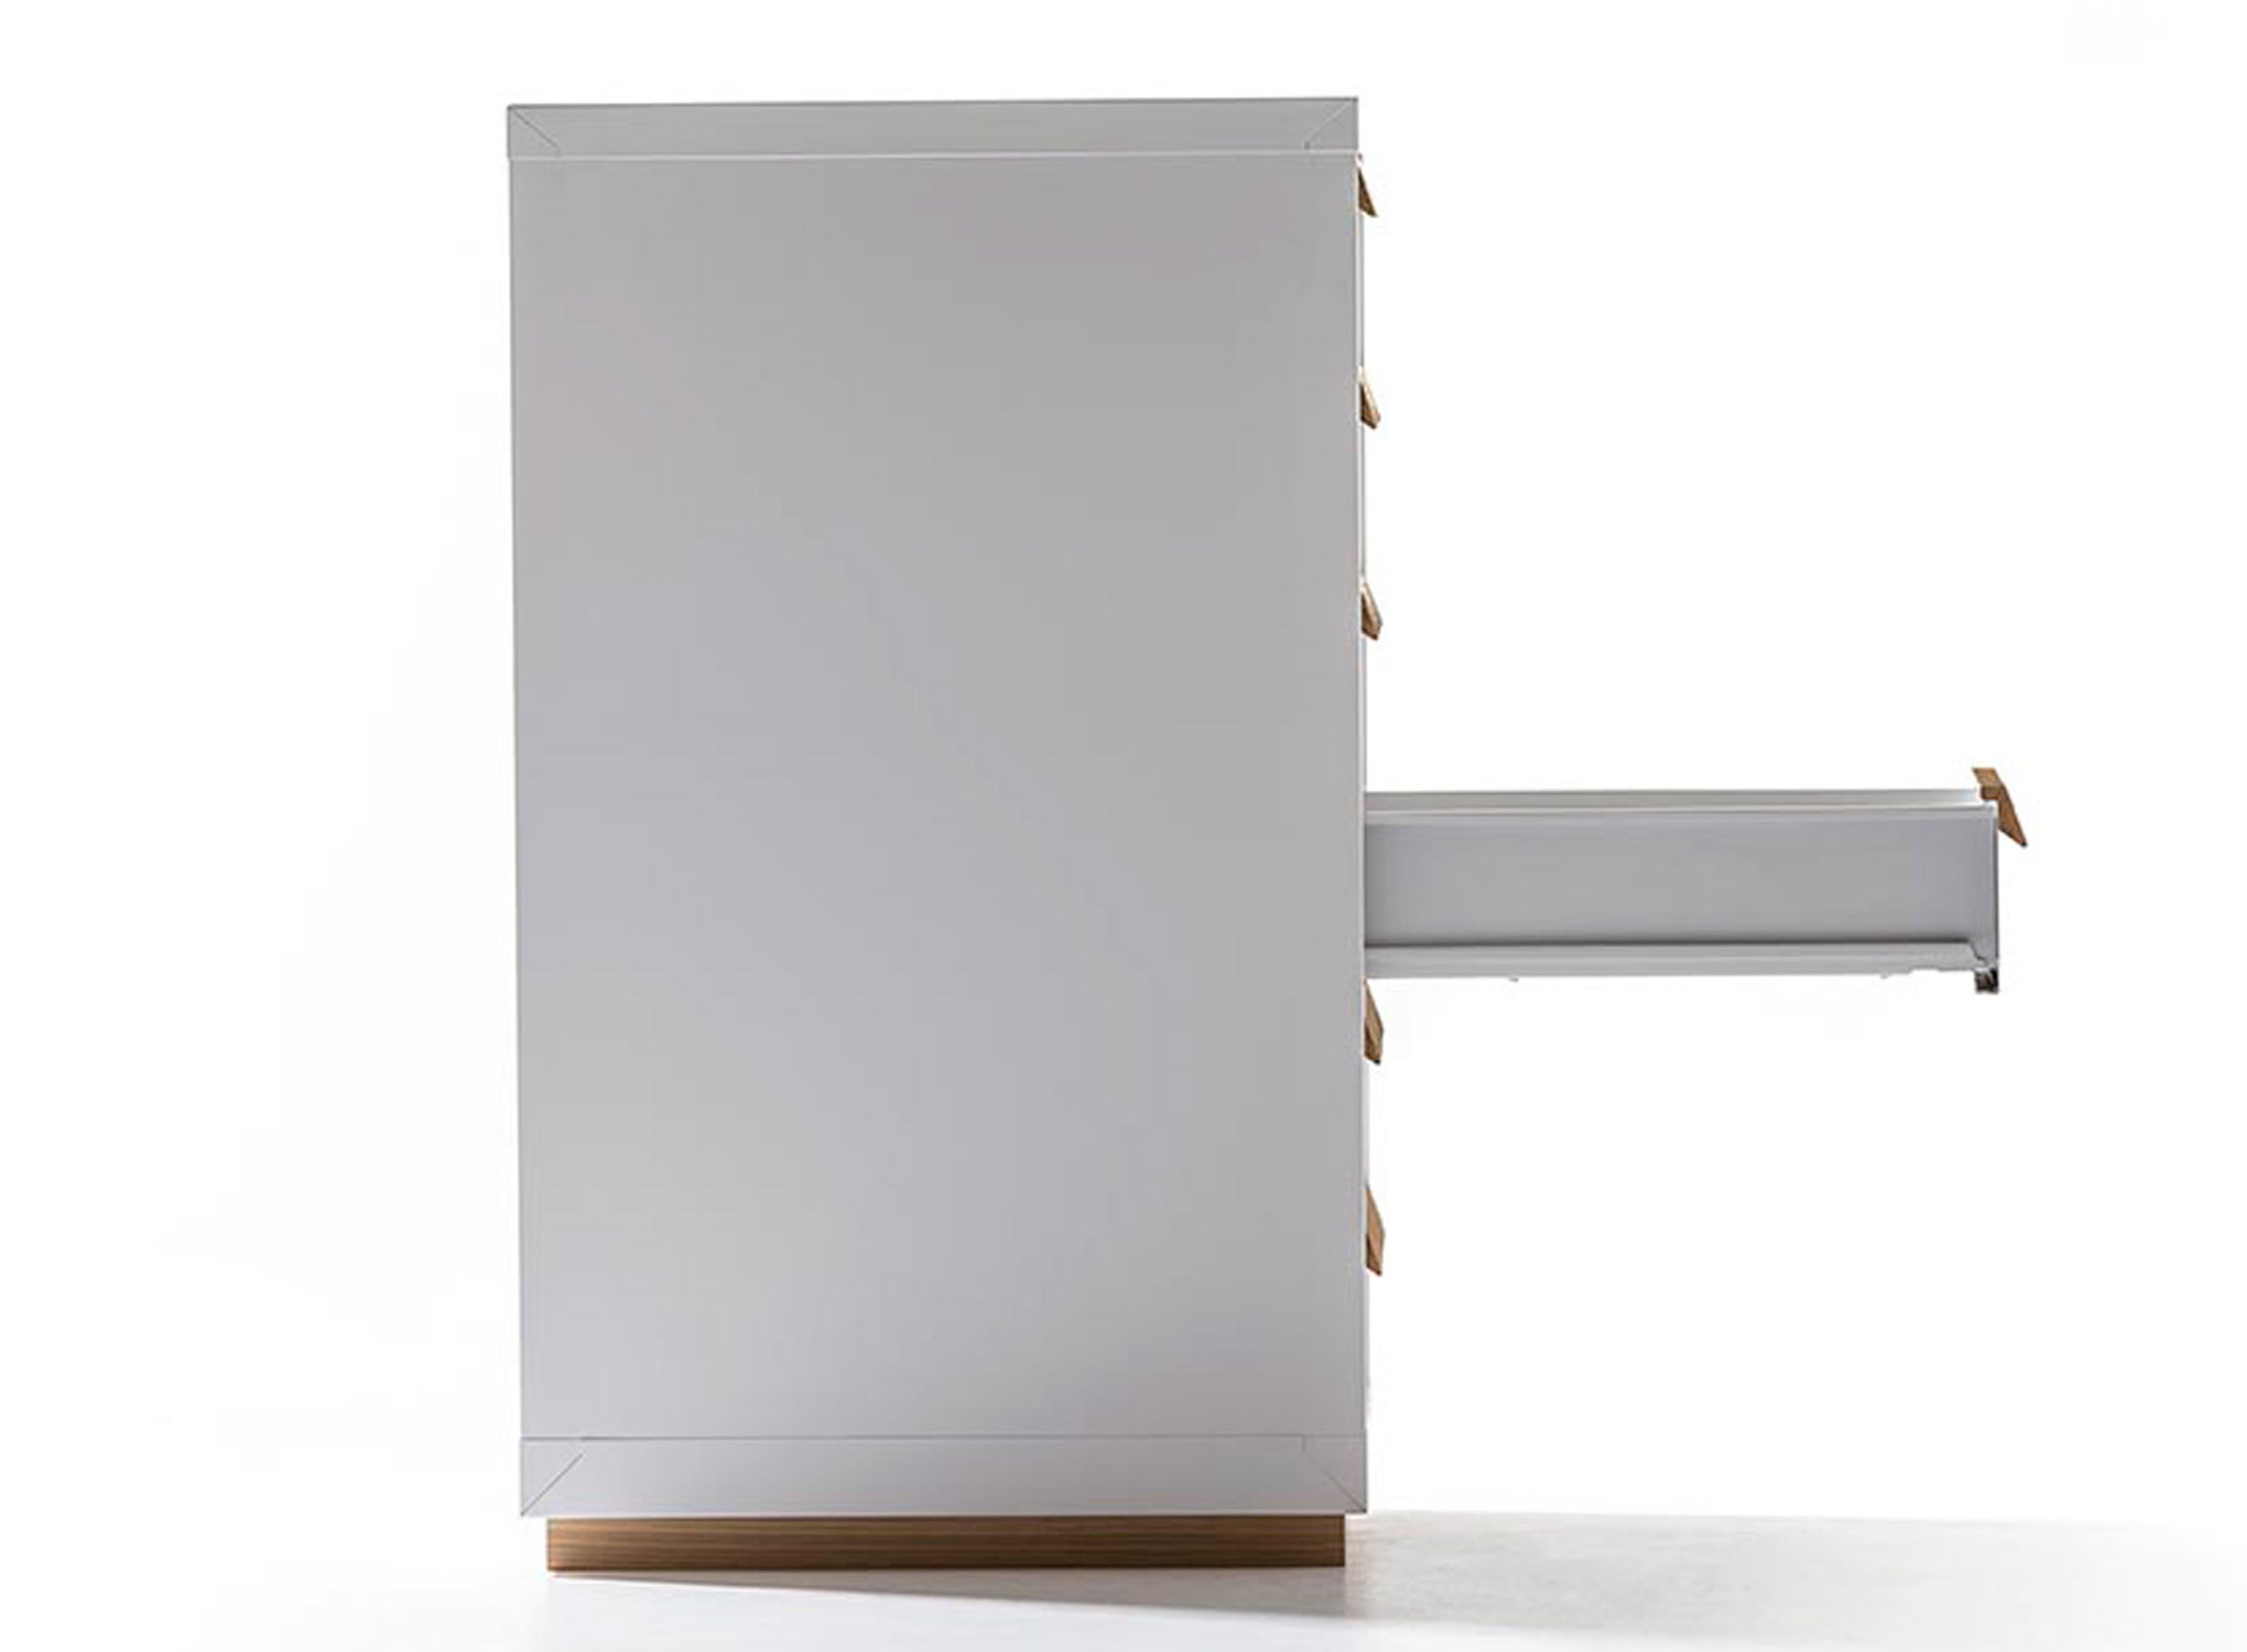 Konstantin Grcic has designed a range of steel furniture using manufacturing techniques more commonly utilised to create industrial storage containers.